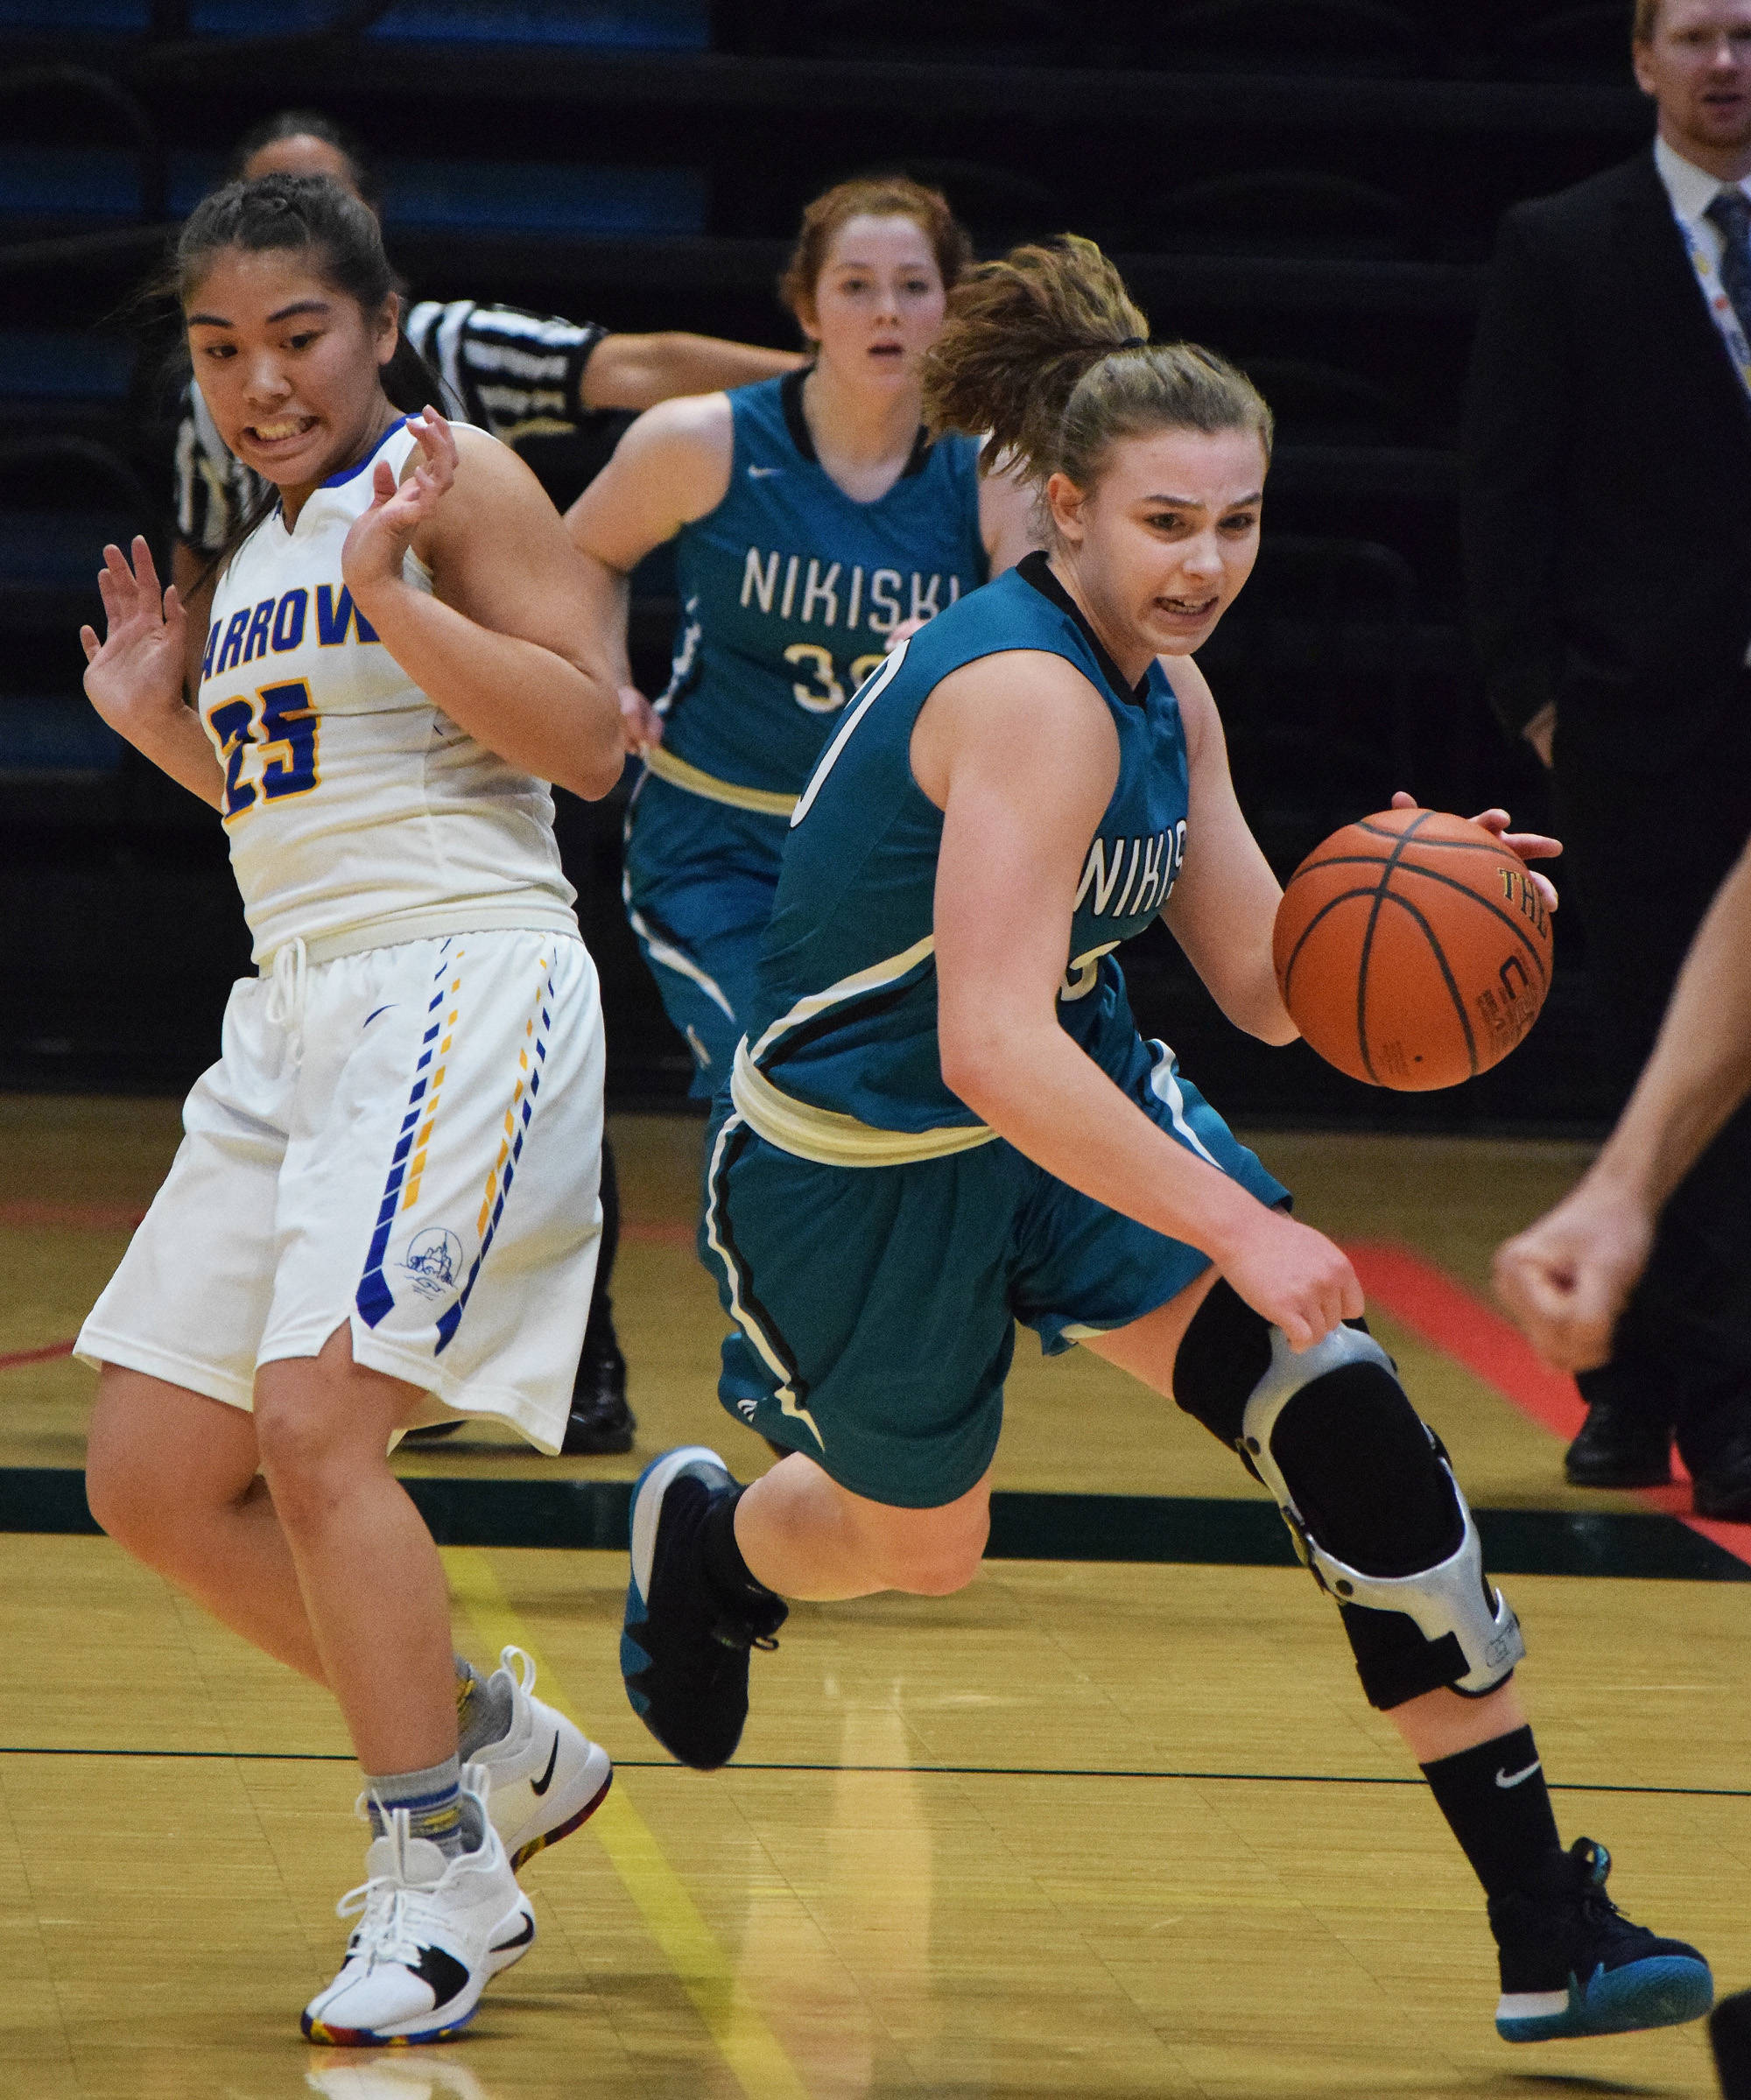 Nikiski’s Bethany Carstens (right) dodges Barrow defender Jordan Ahgeak in the second half of a quarterfinal contest Thursday evening at the Class 3A state tournament at the Alaska Airlines Center. (Photo by Joey Klecka/Peninsula Clarion)